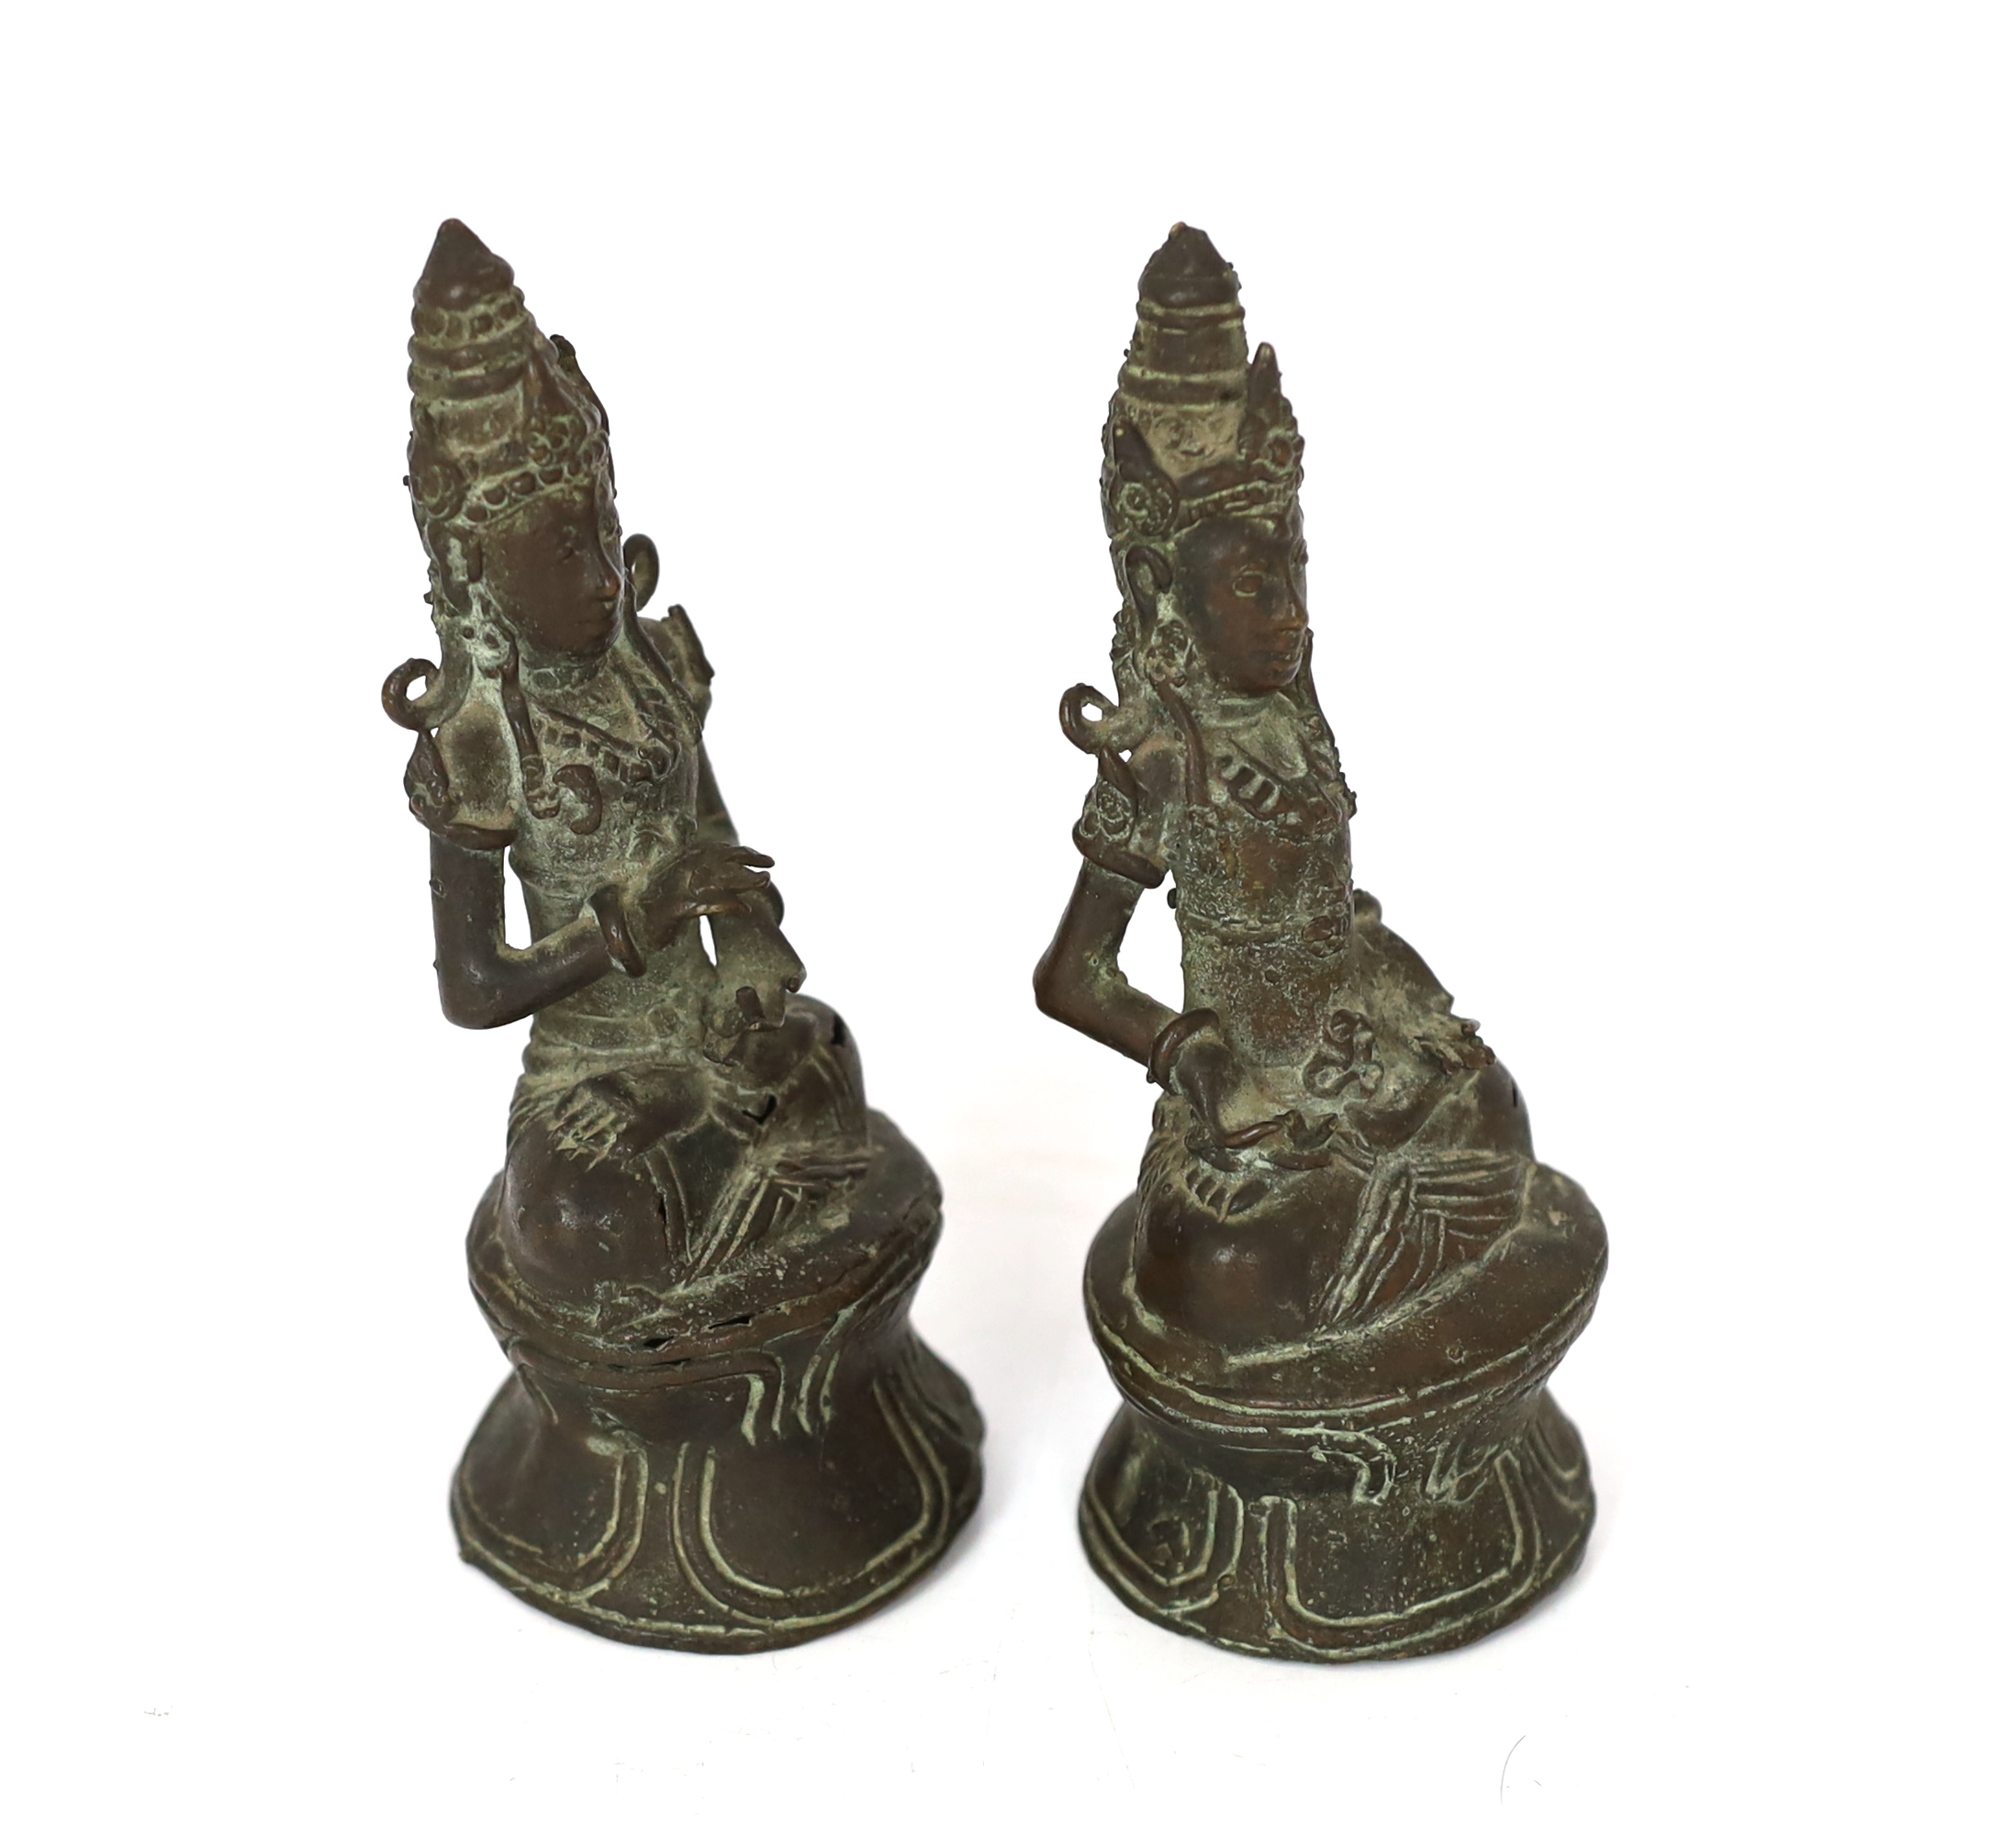 A pair of bronze seated figures of Bodhisattva, Java, 18th/19th century, each 10cm, Please note this lot attracts an additional import tax of 5% on the hammer price